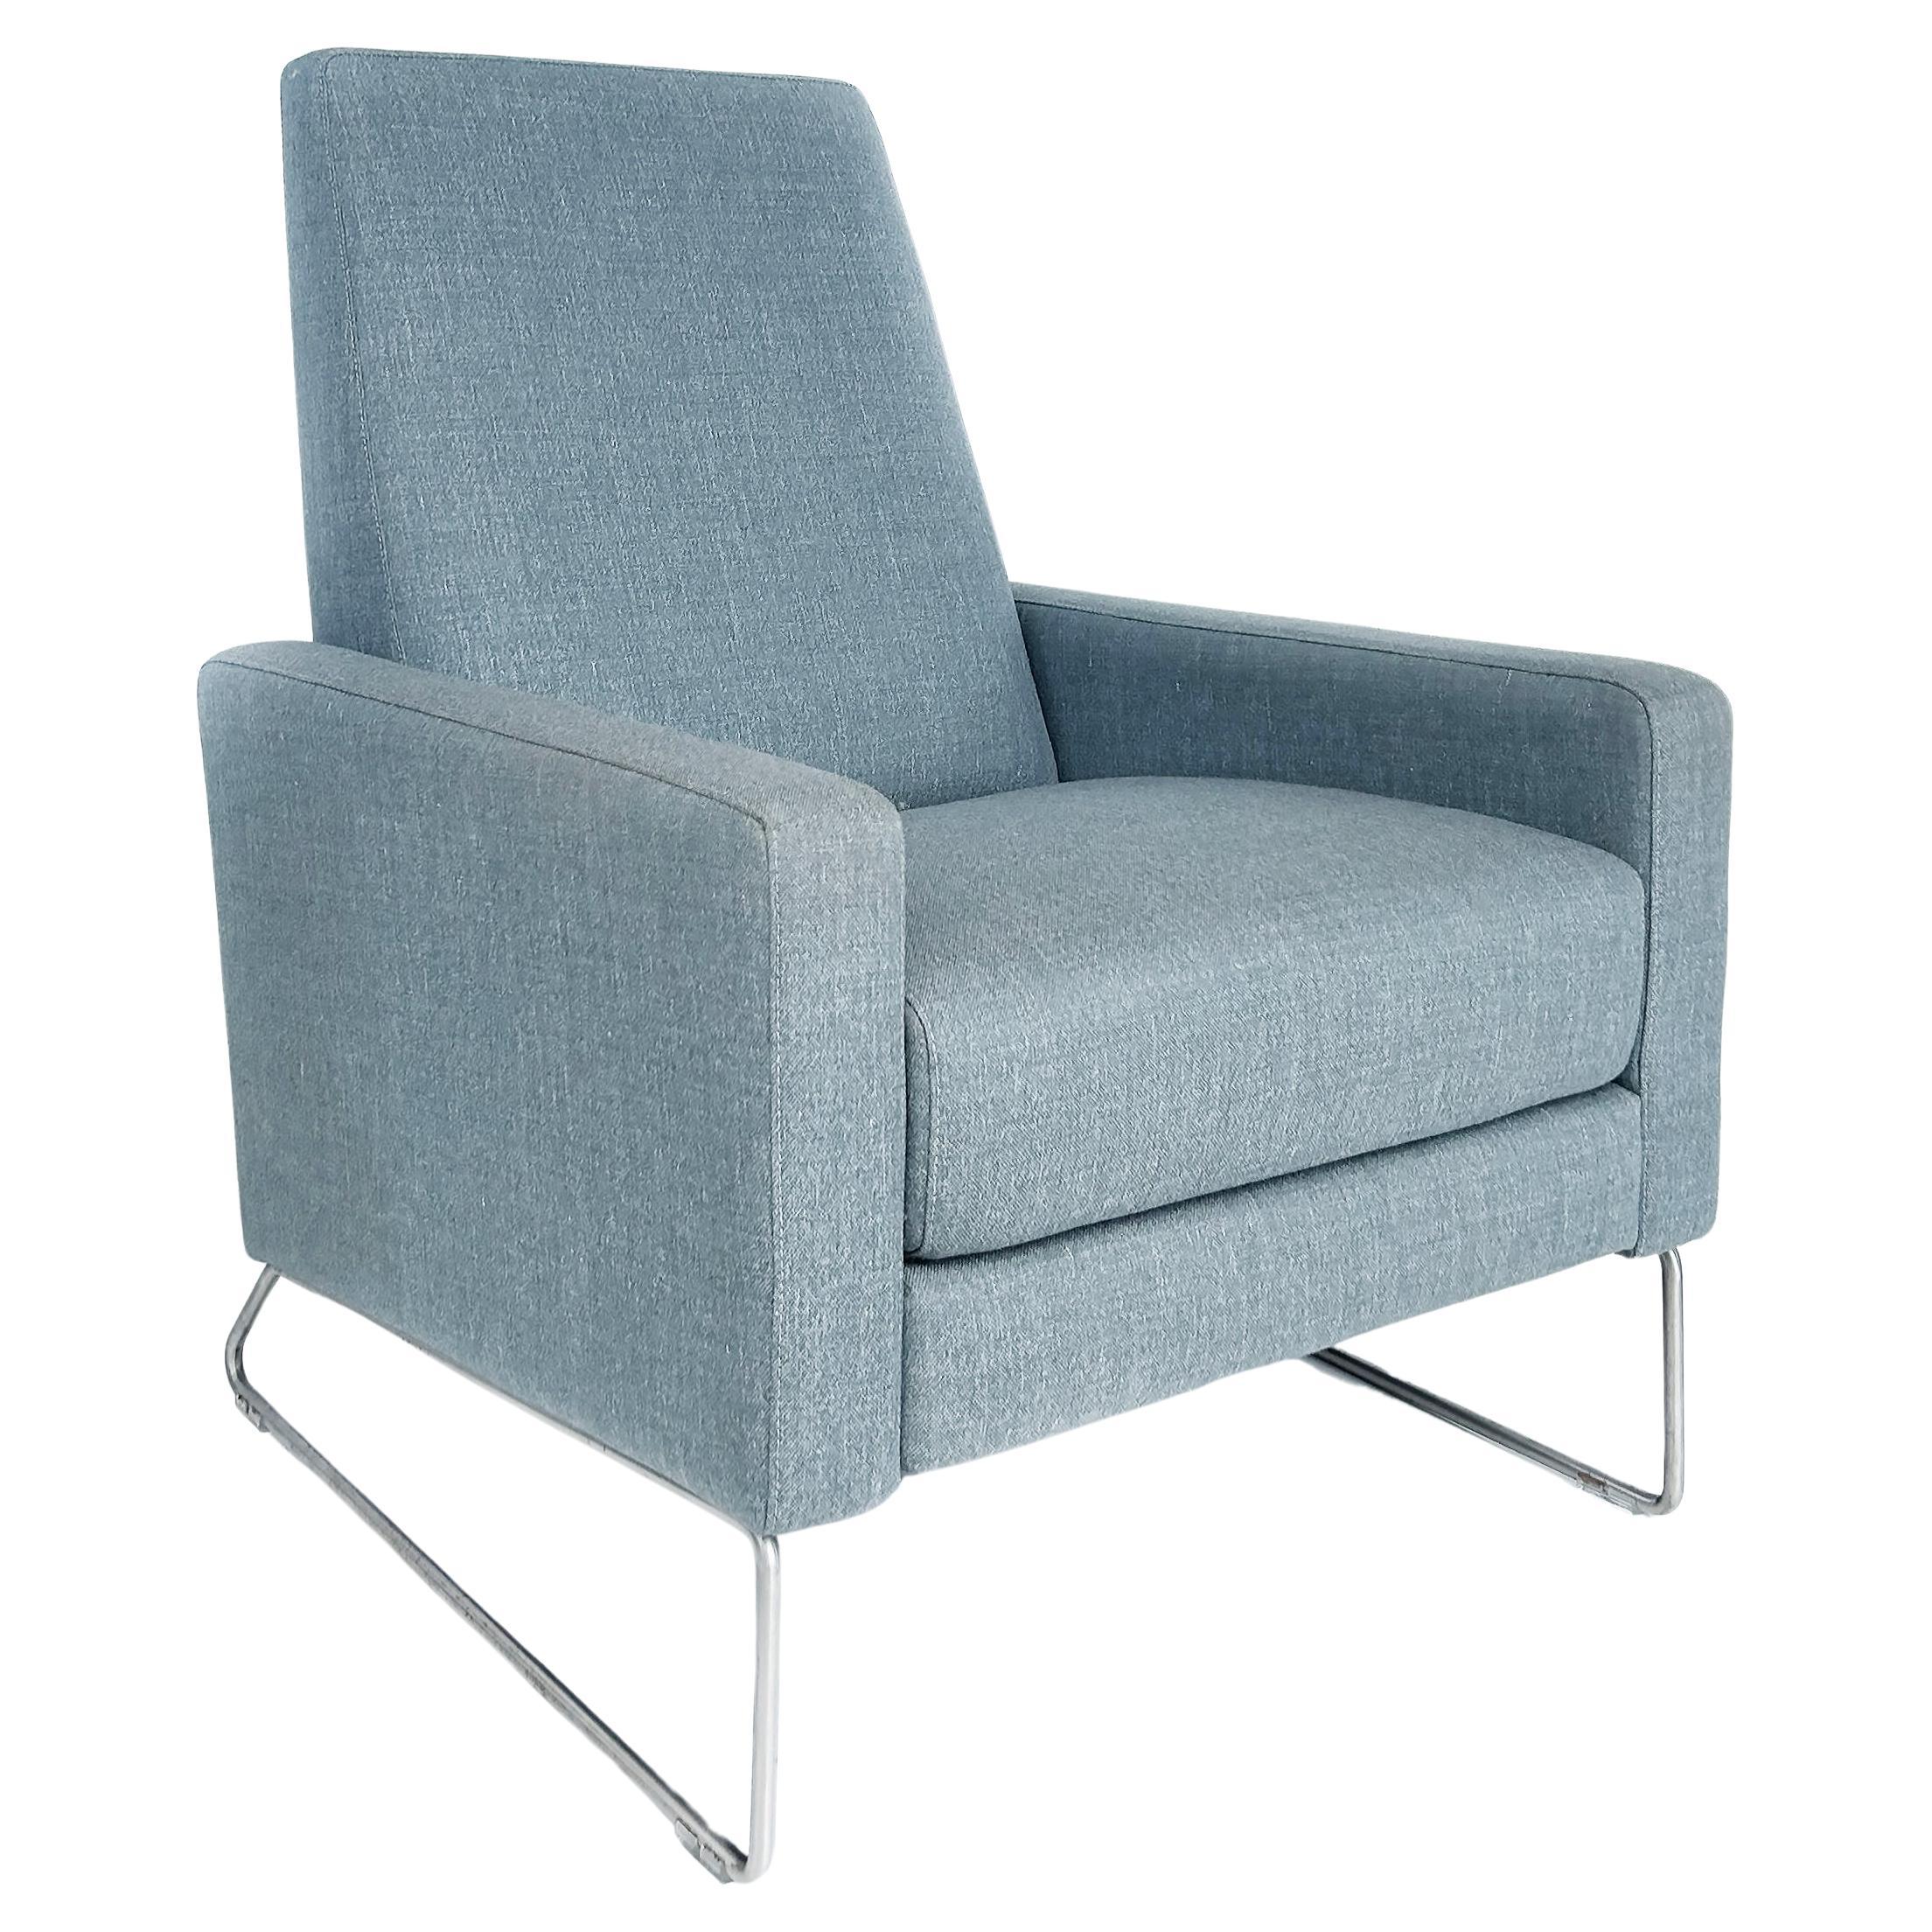 Design Within Reach Flight Recliner, Stainless Steel and Linen Fabric